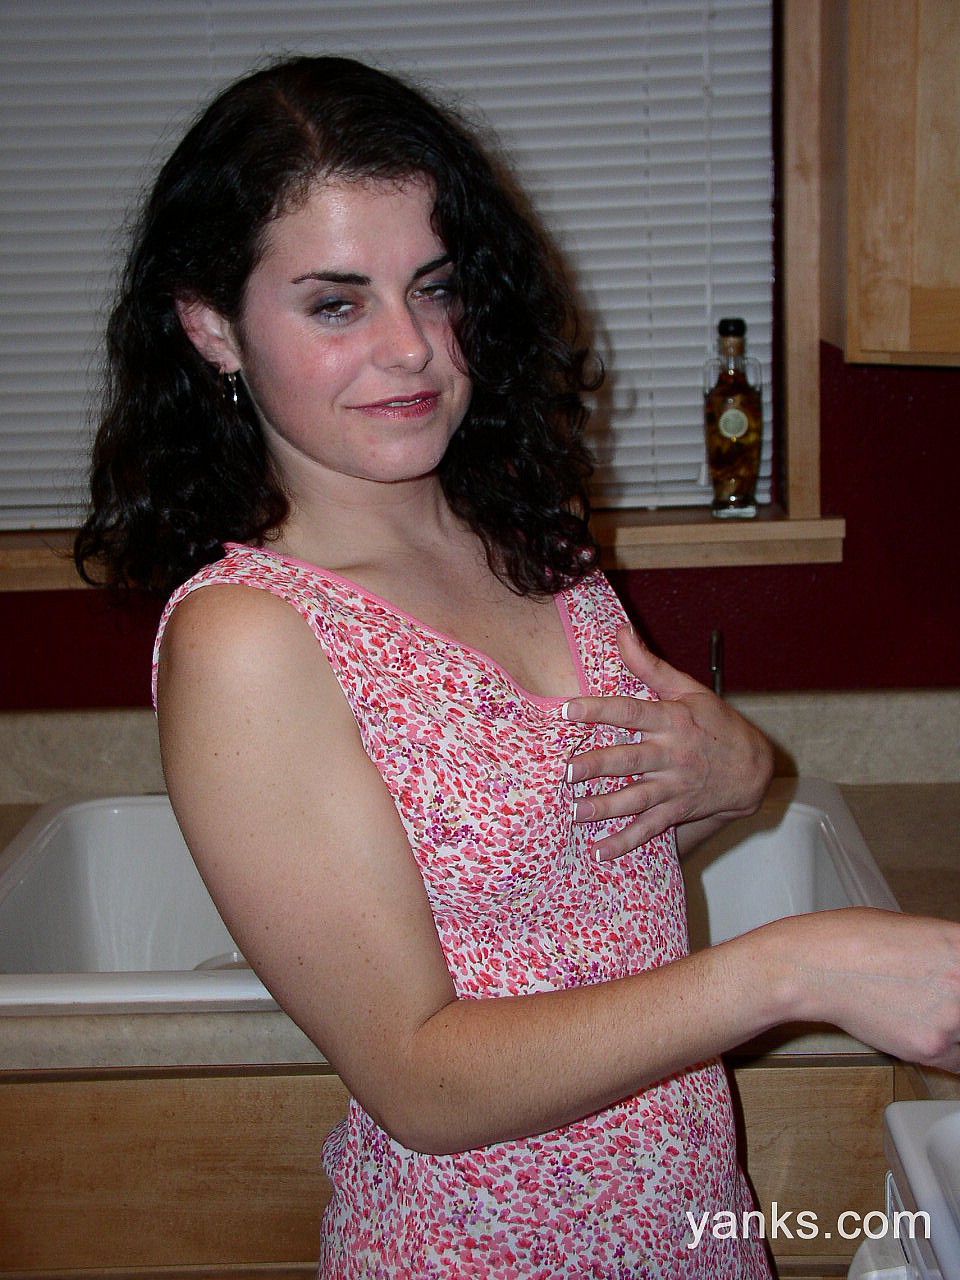 Sexy brunette babe Michelle poses in kitchen and fucks her cunt with carrot porn photo #427200618 | Yanks Pics, Michelle, Amateur, mobile porn